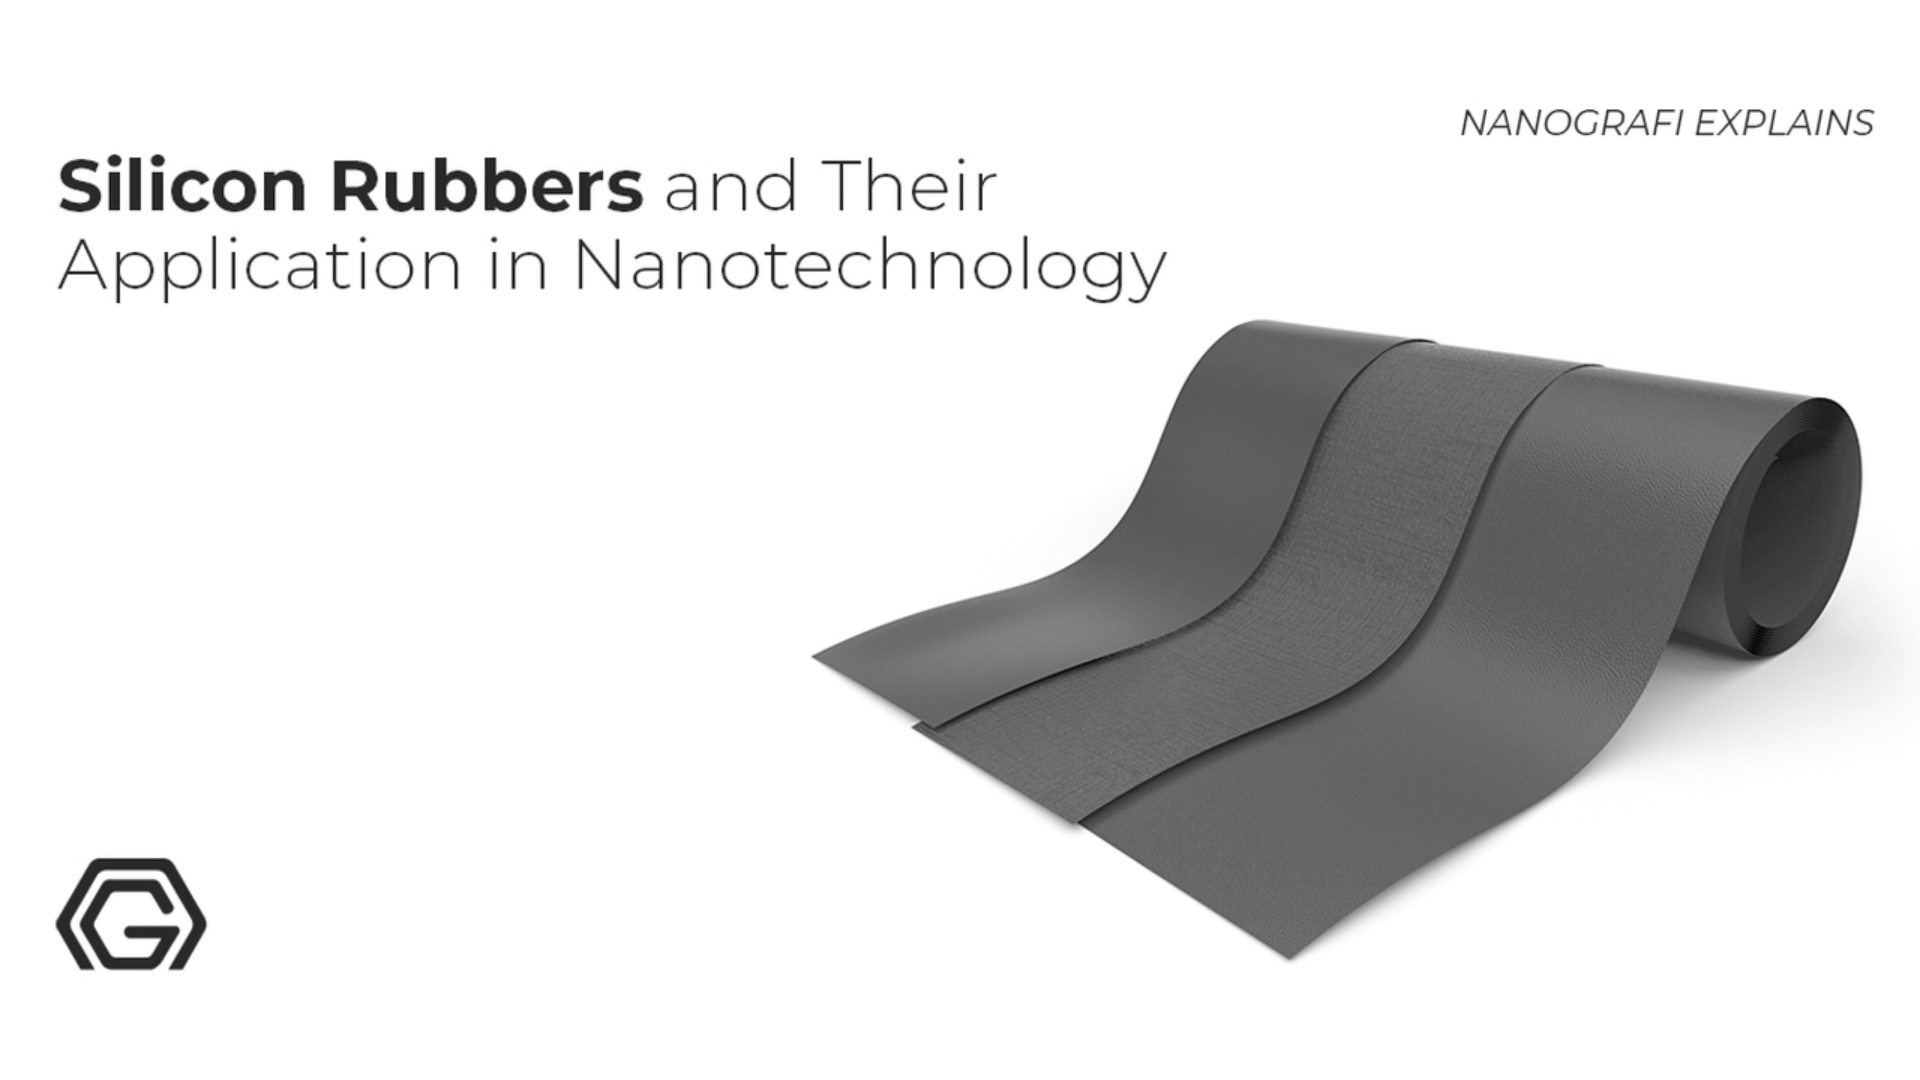 Silicon rubbers and their application in nanotechnology